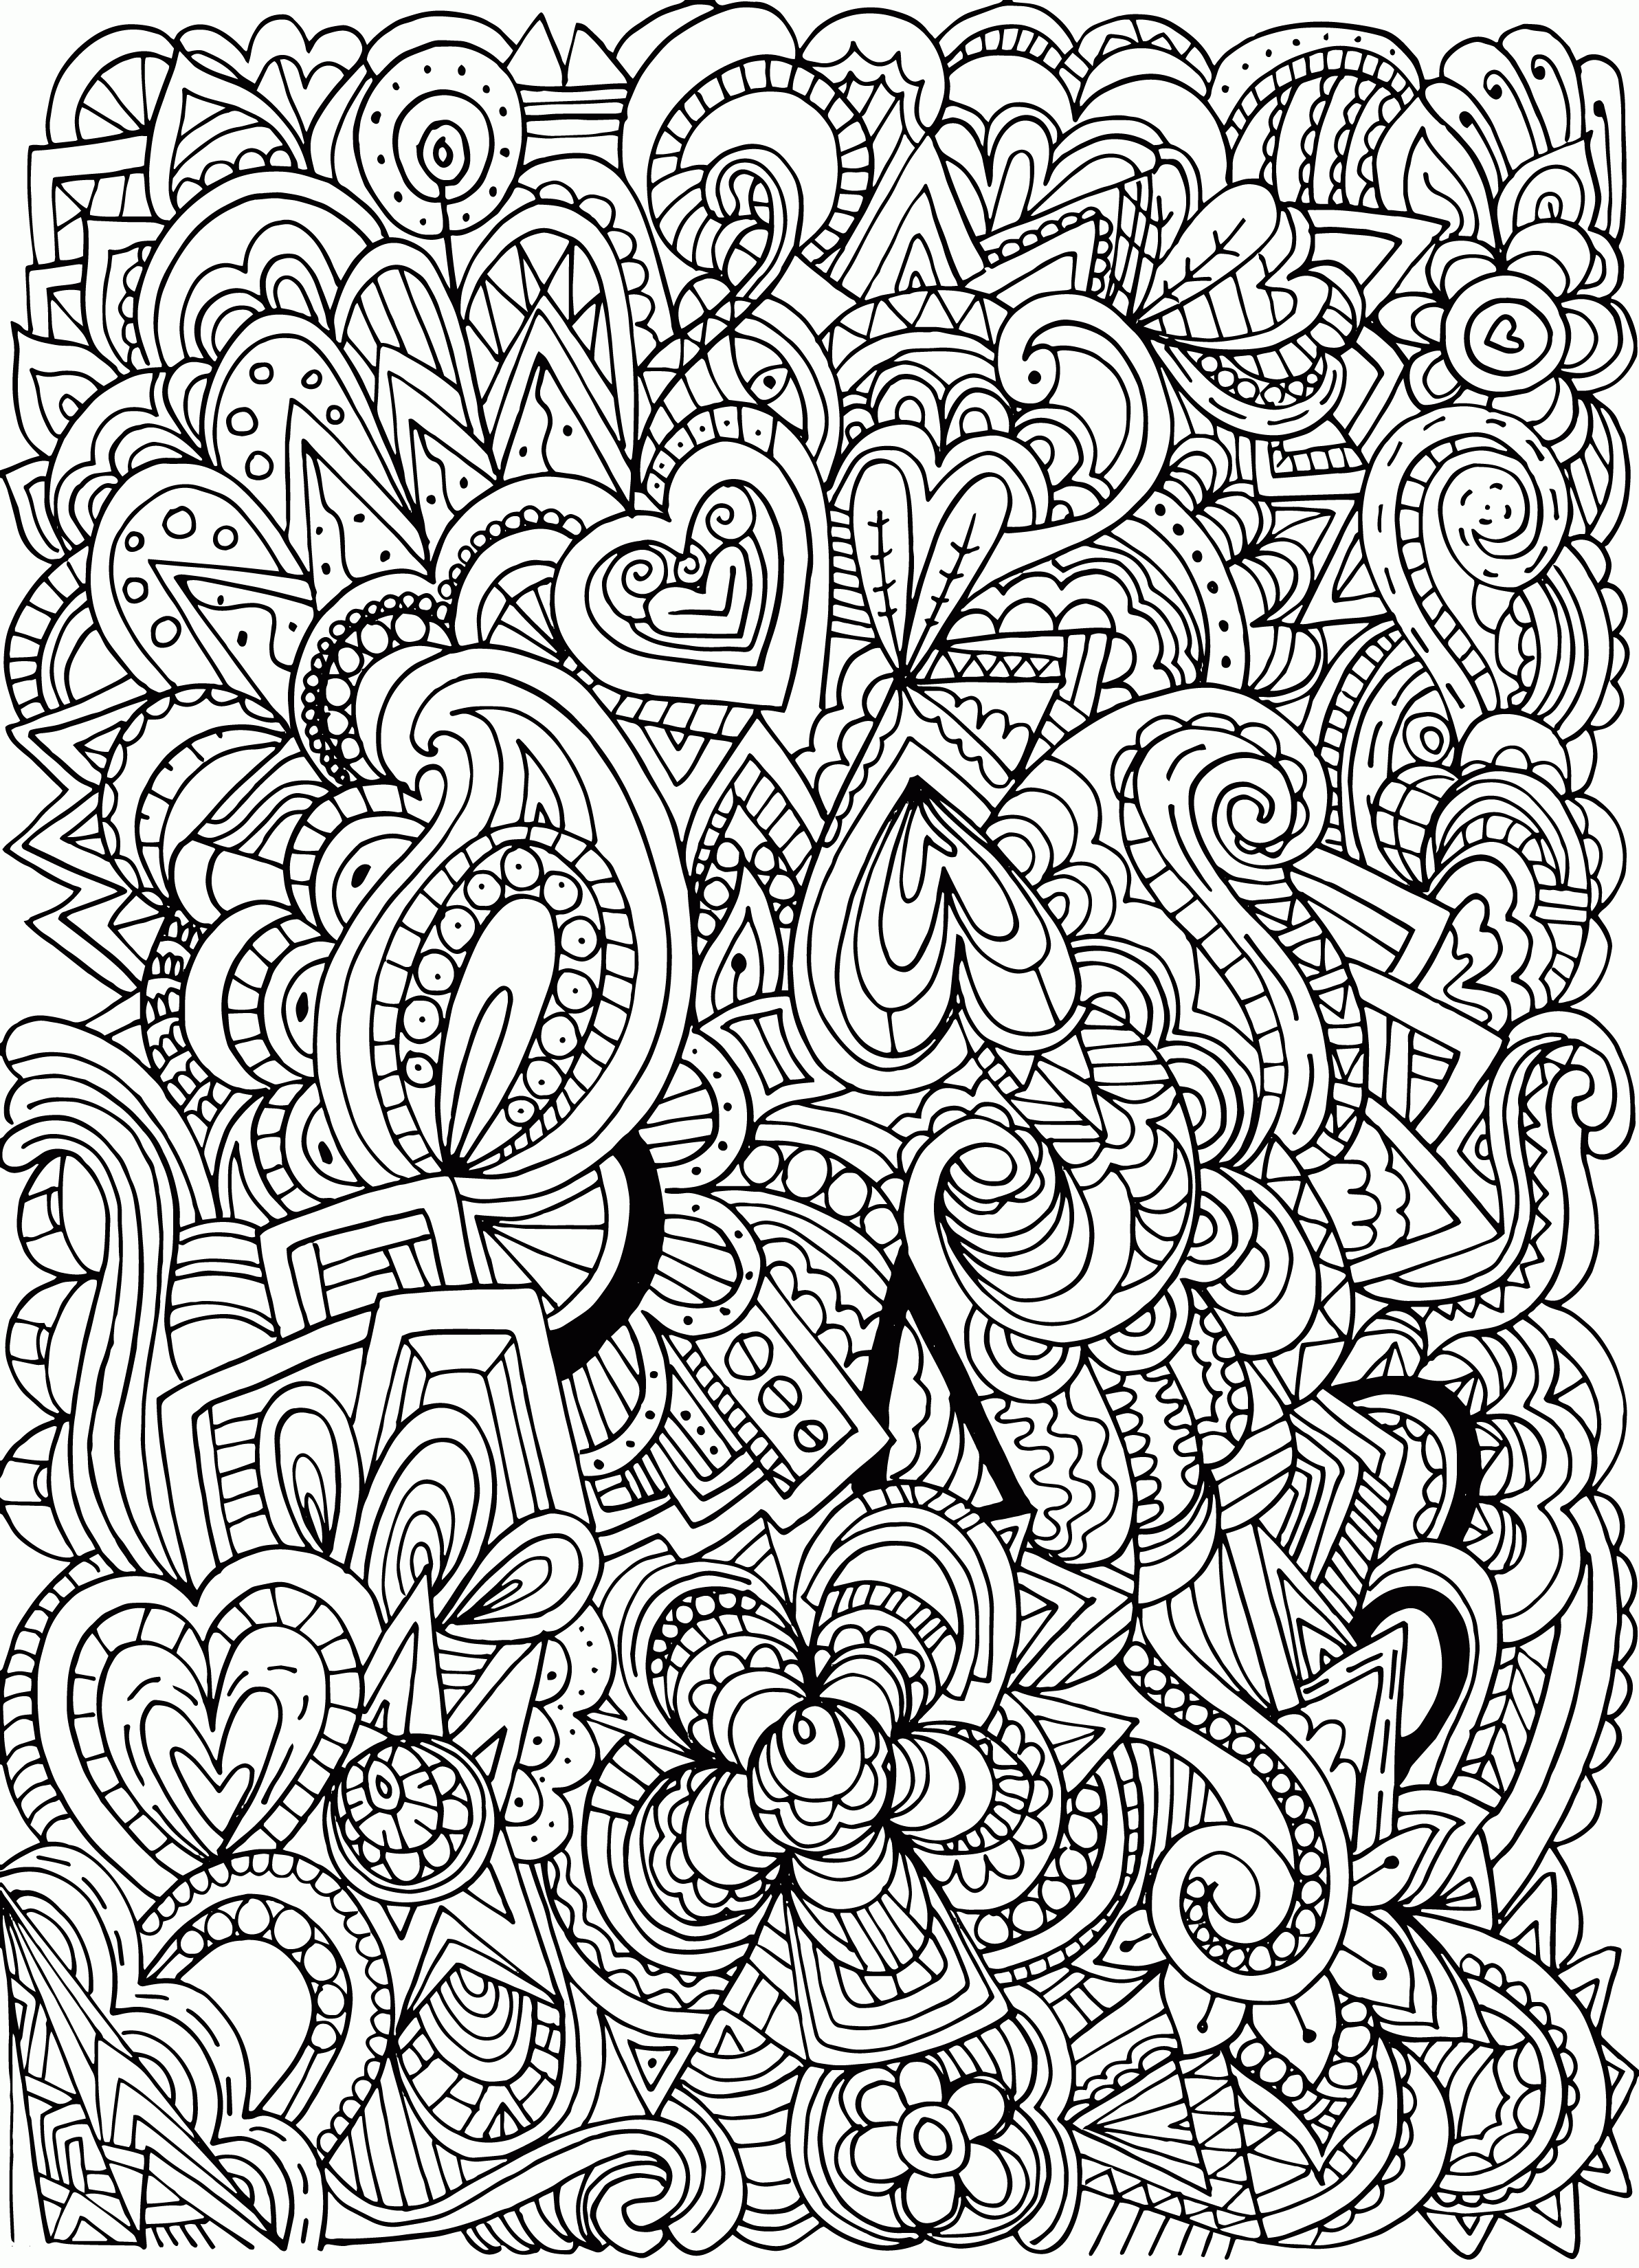 Adult Coloring Pages Printable Pattern - Ð¡oloring Pages For All Ages